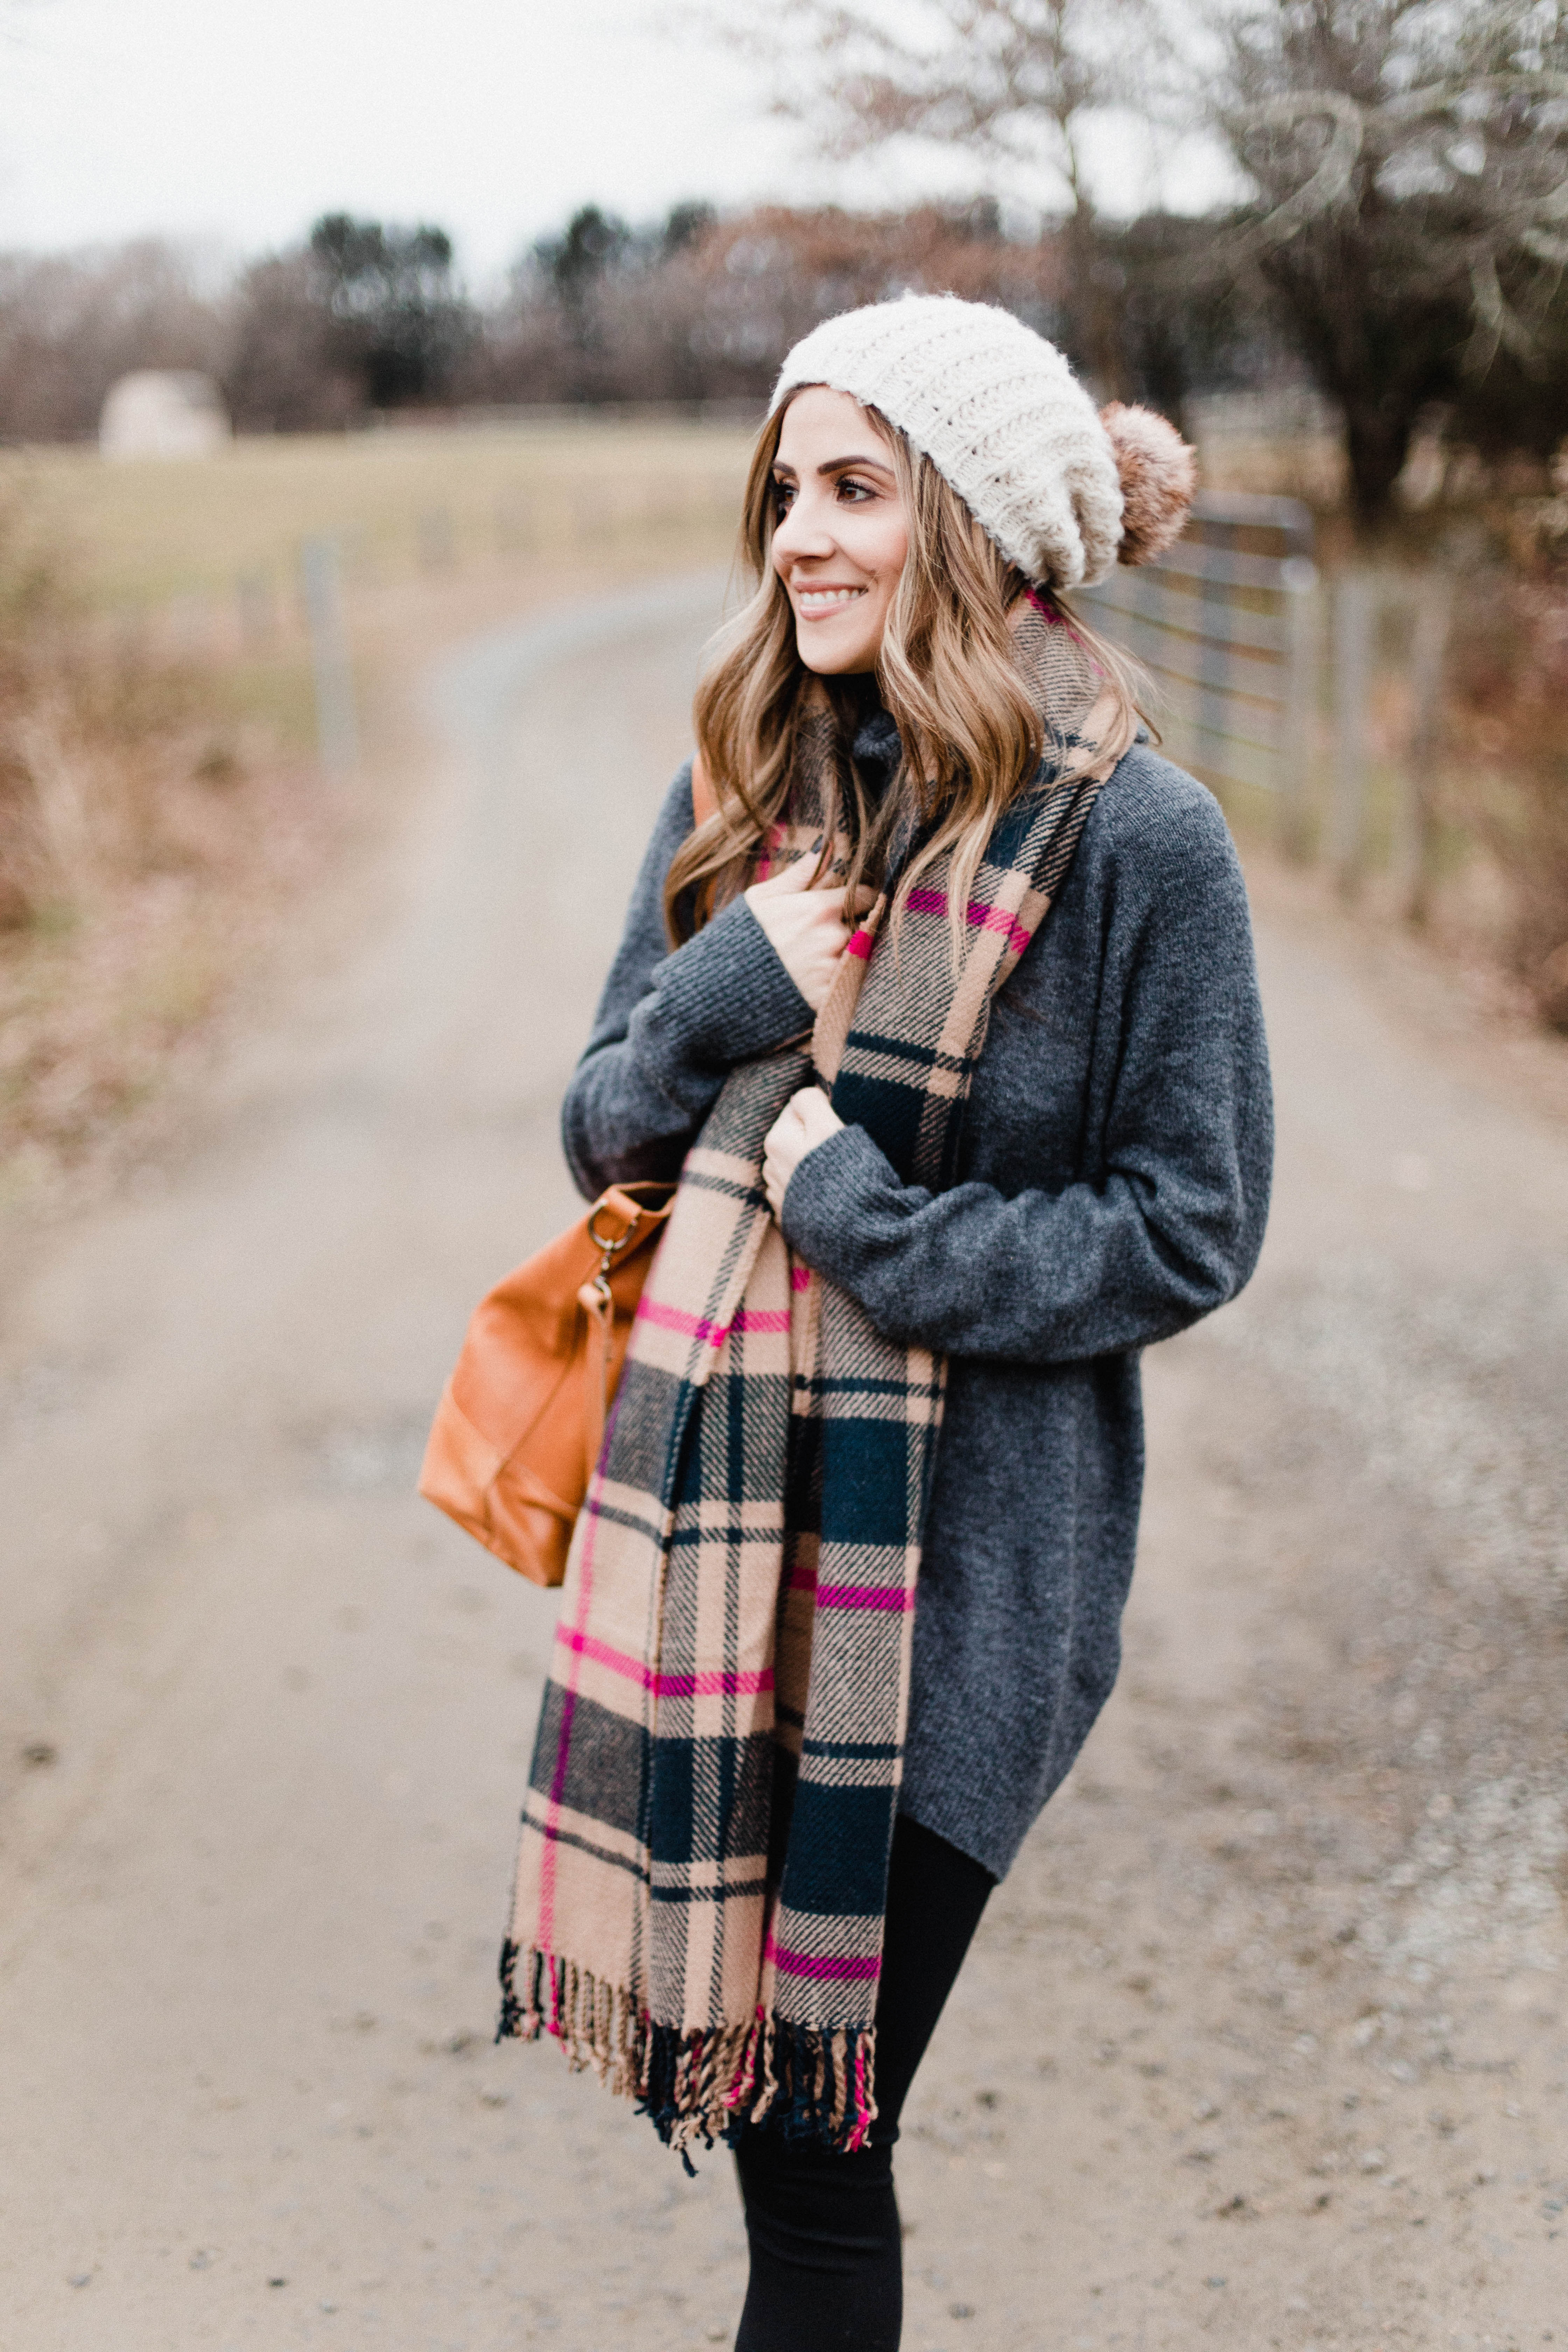 Connecticut life and style blogger Lauren McBride shares how to style low cut booties with socks for the fall and winter seasons.